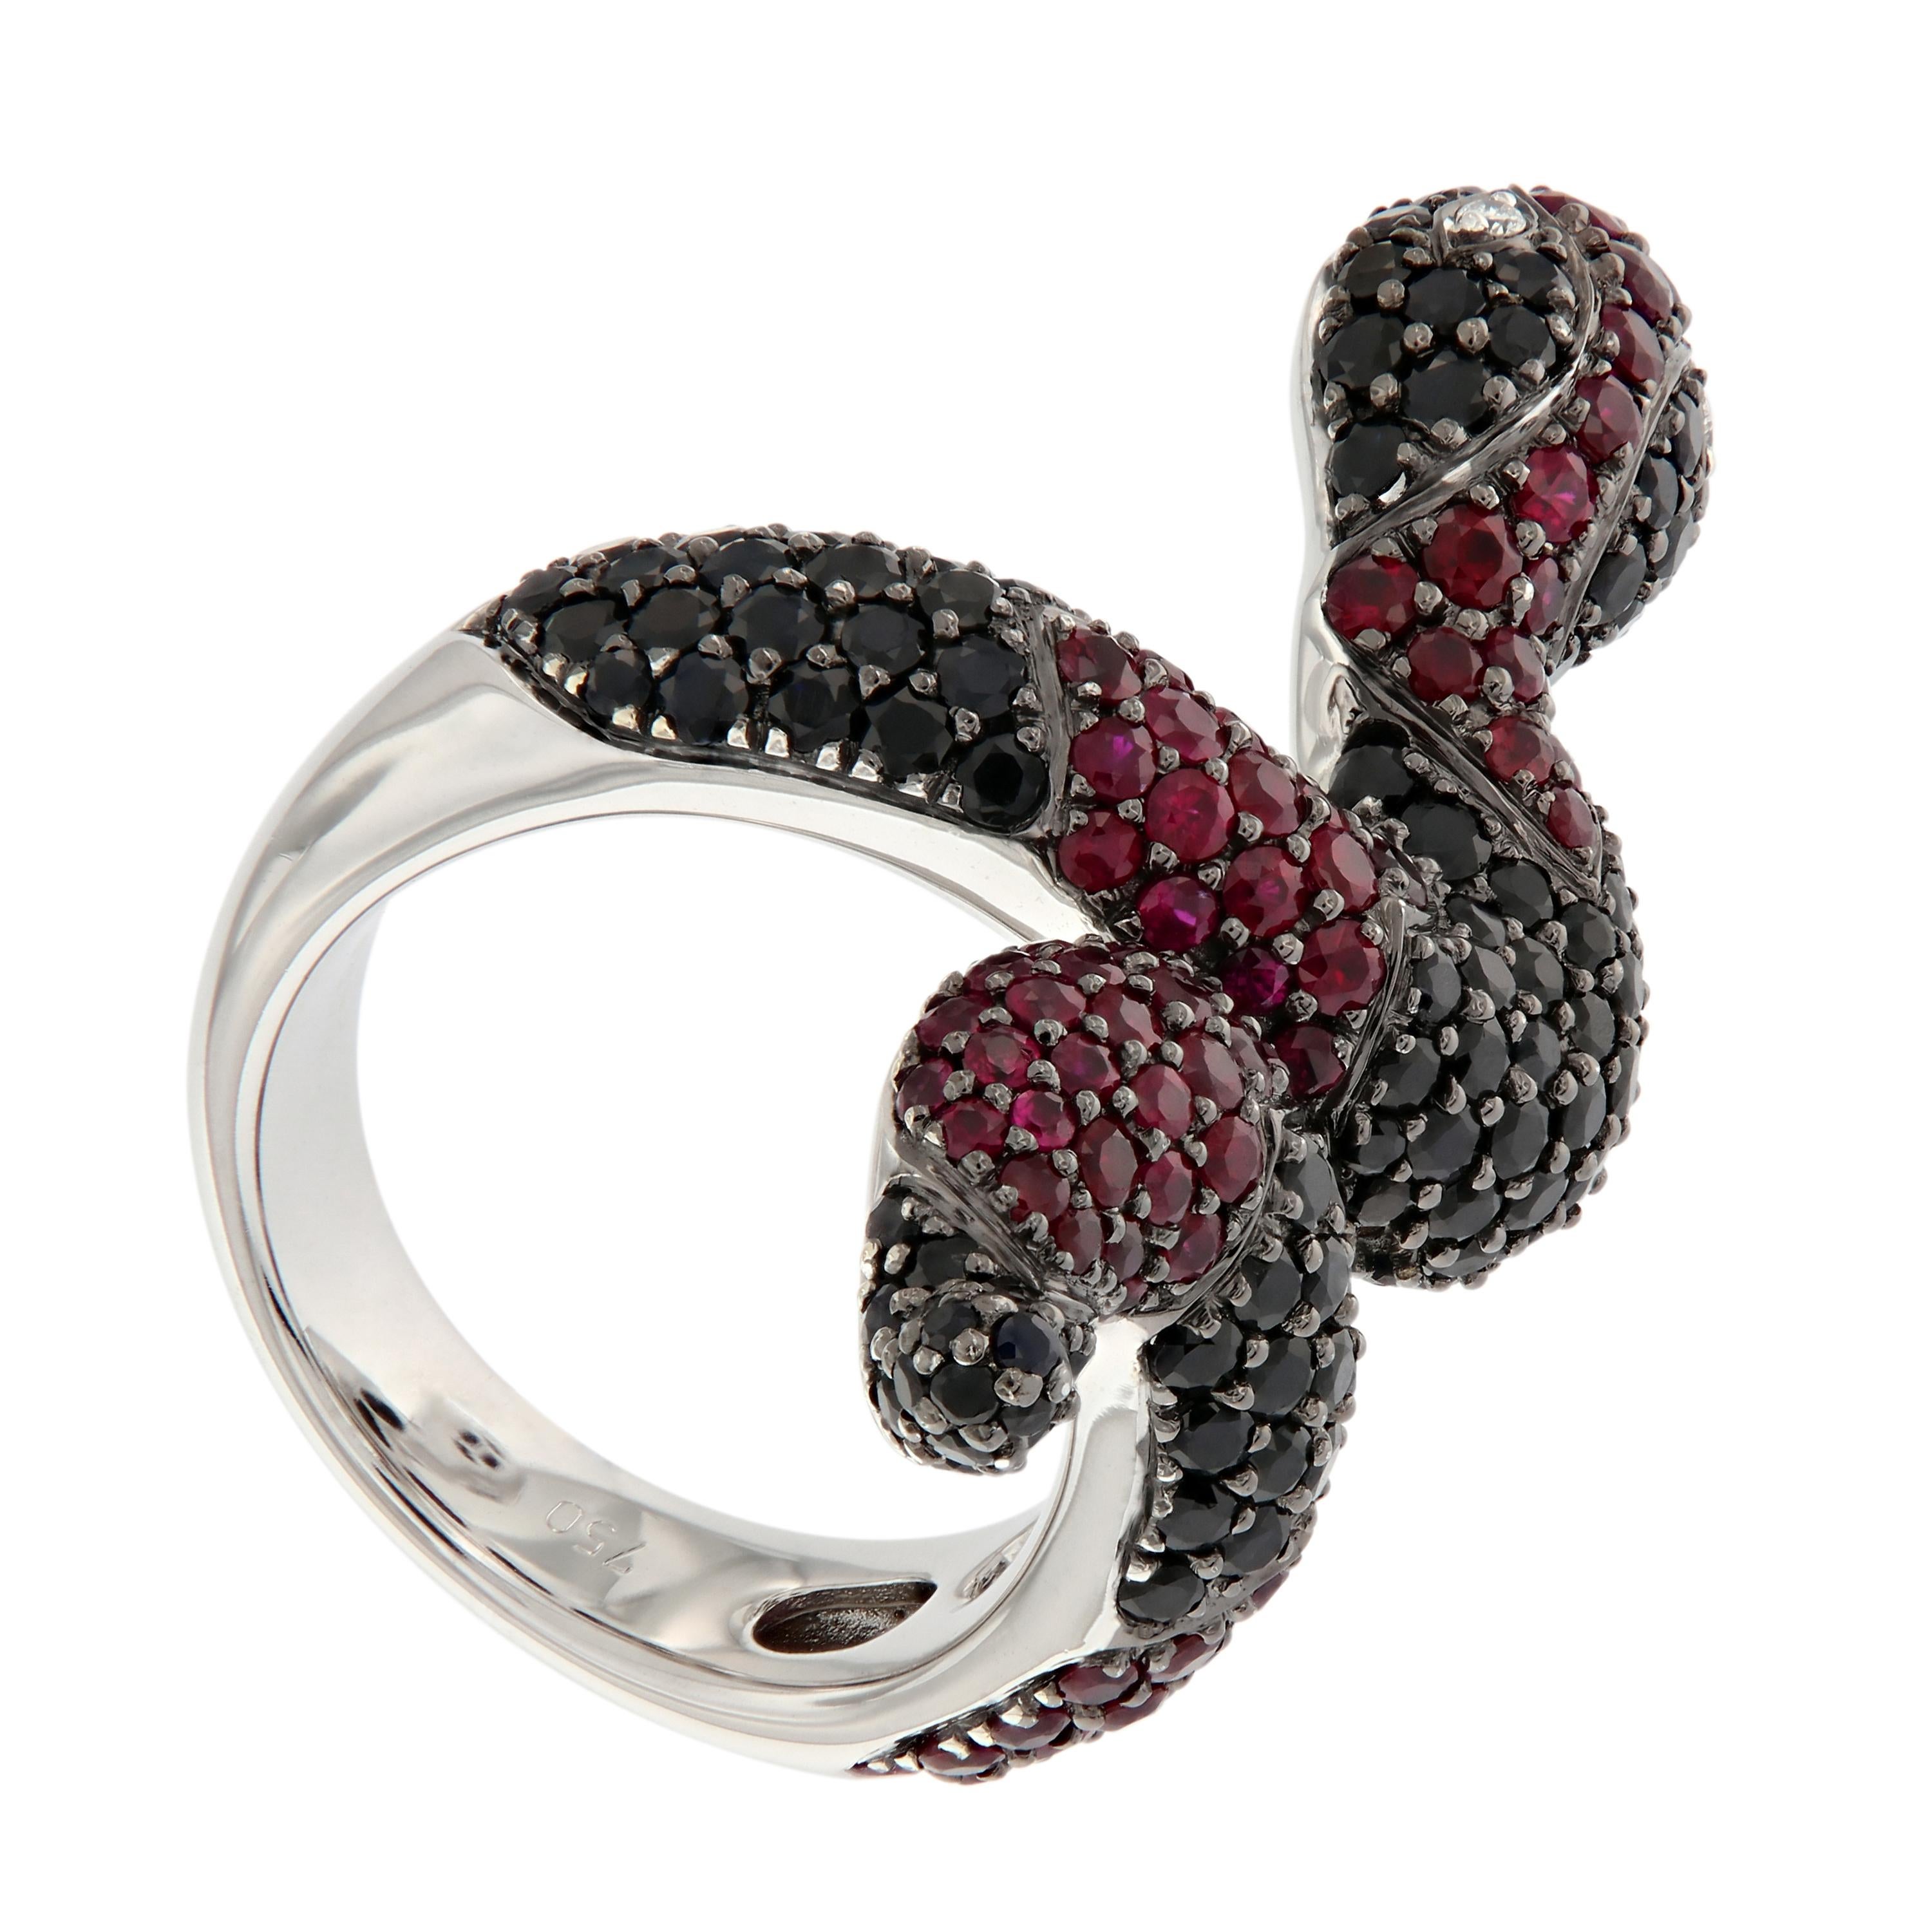 Fashion serpent ring with an exotic edge is crafted in 18k white gold. The coiled serpent design is detailed with black sapphires, rubies and diamond eyes. Ring size 6.5. Weighs 20 grams. 

Black Sapphire 3.48 cttw
Ruby 1.76 cttw
Diamond 0.20 cttw